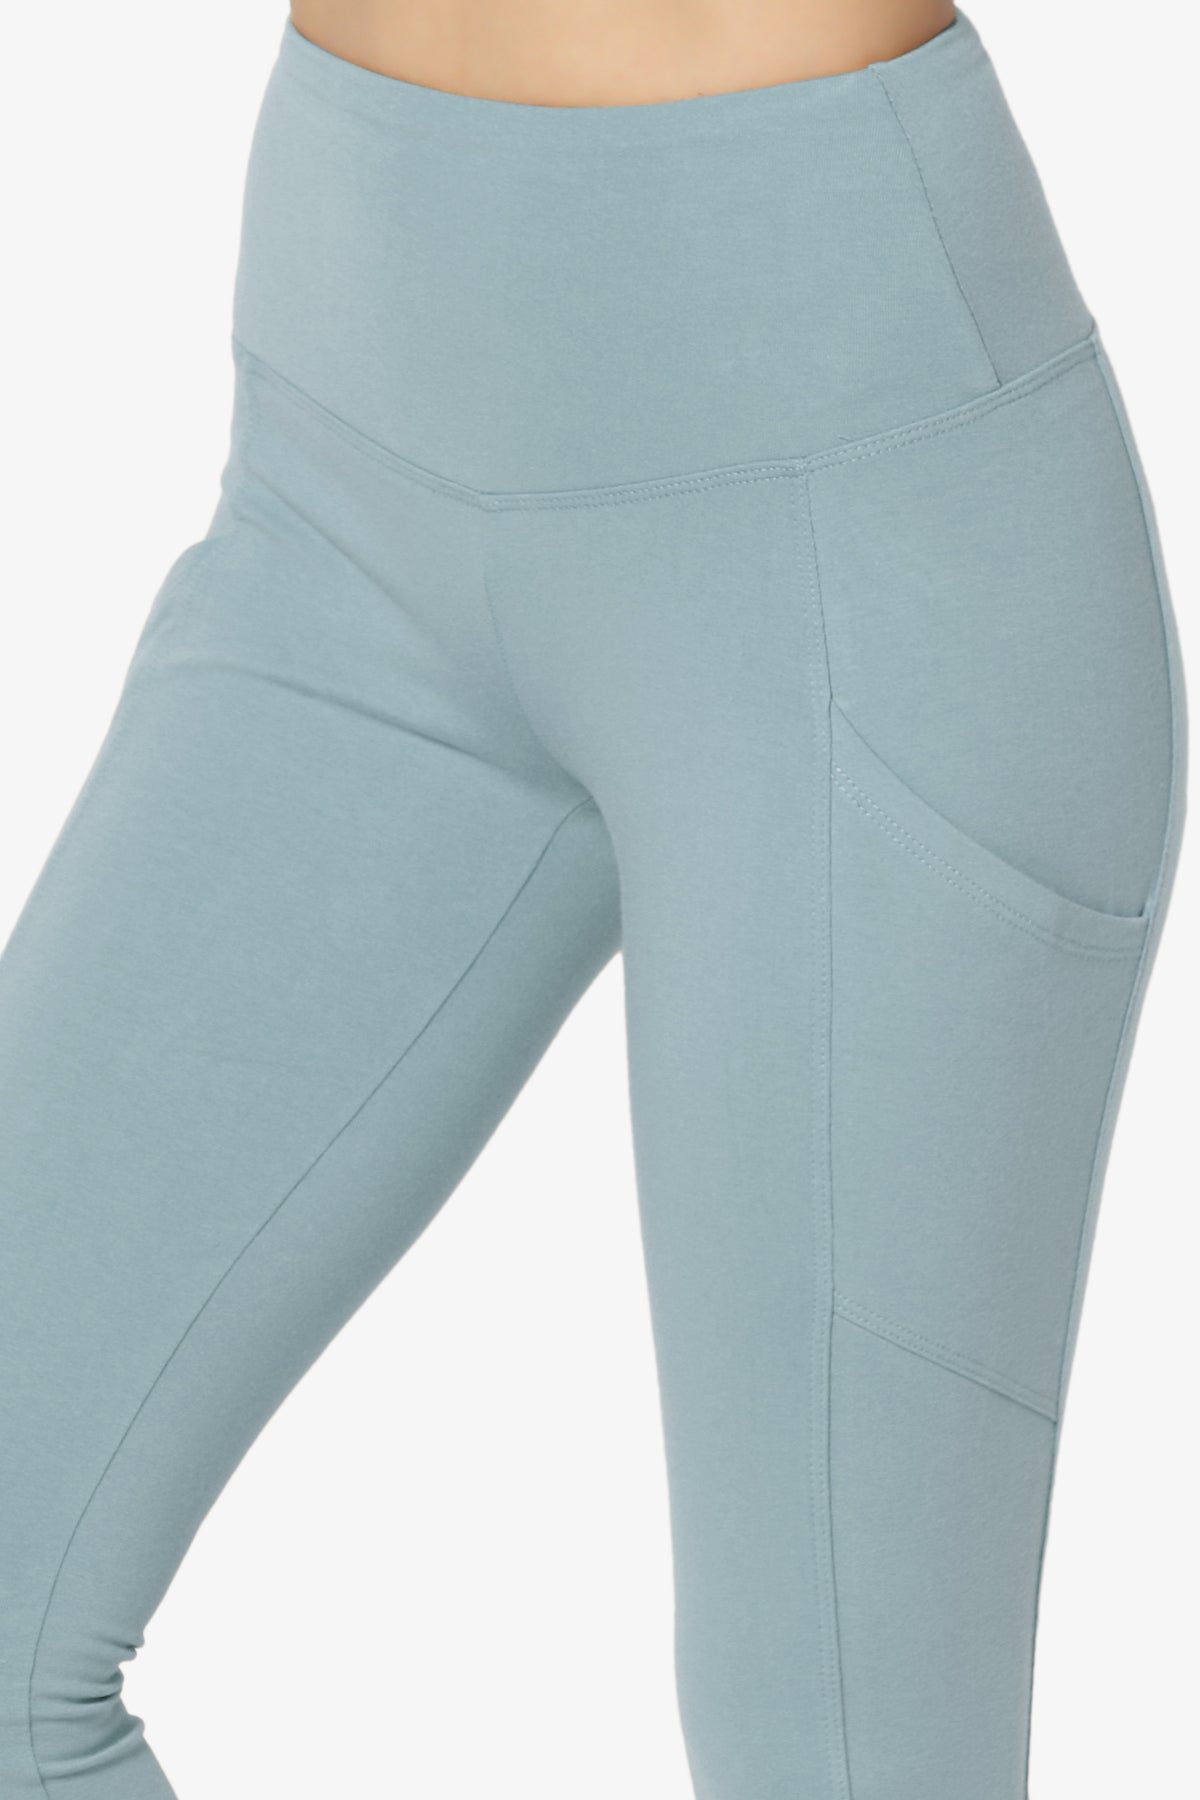 Ansley Luxe Cotton Leggings with Pockets DUSTY BLUE_5